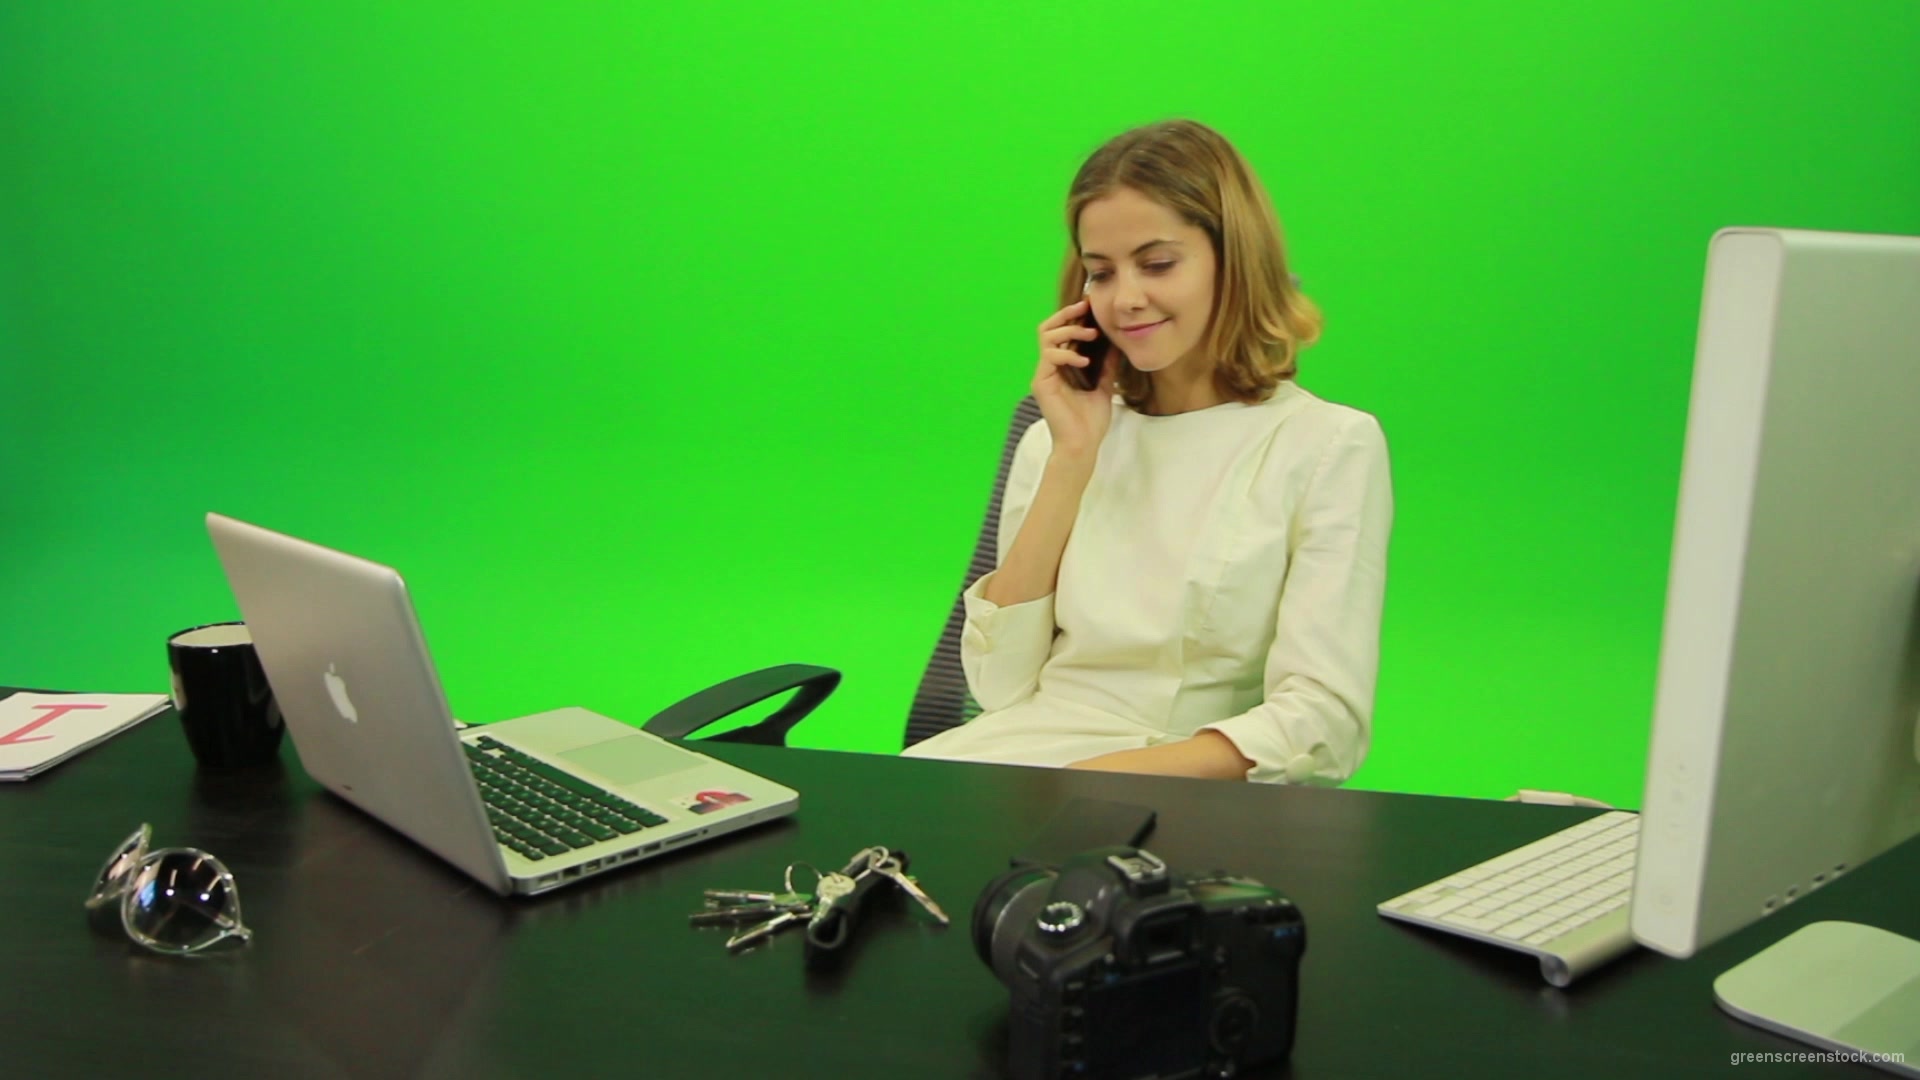 vj video background Laughing-Business-Woman-is-Talking-on-the-Phone-Green-Screen-Footage_003